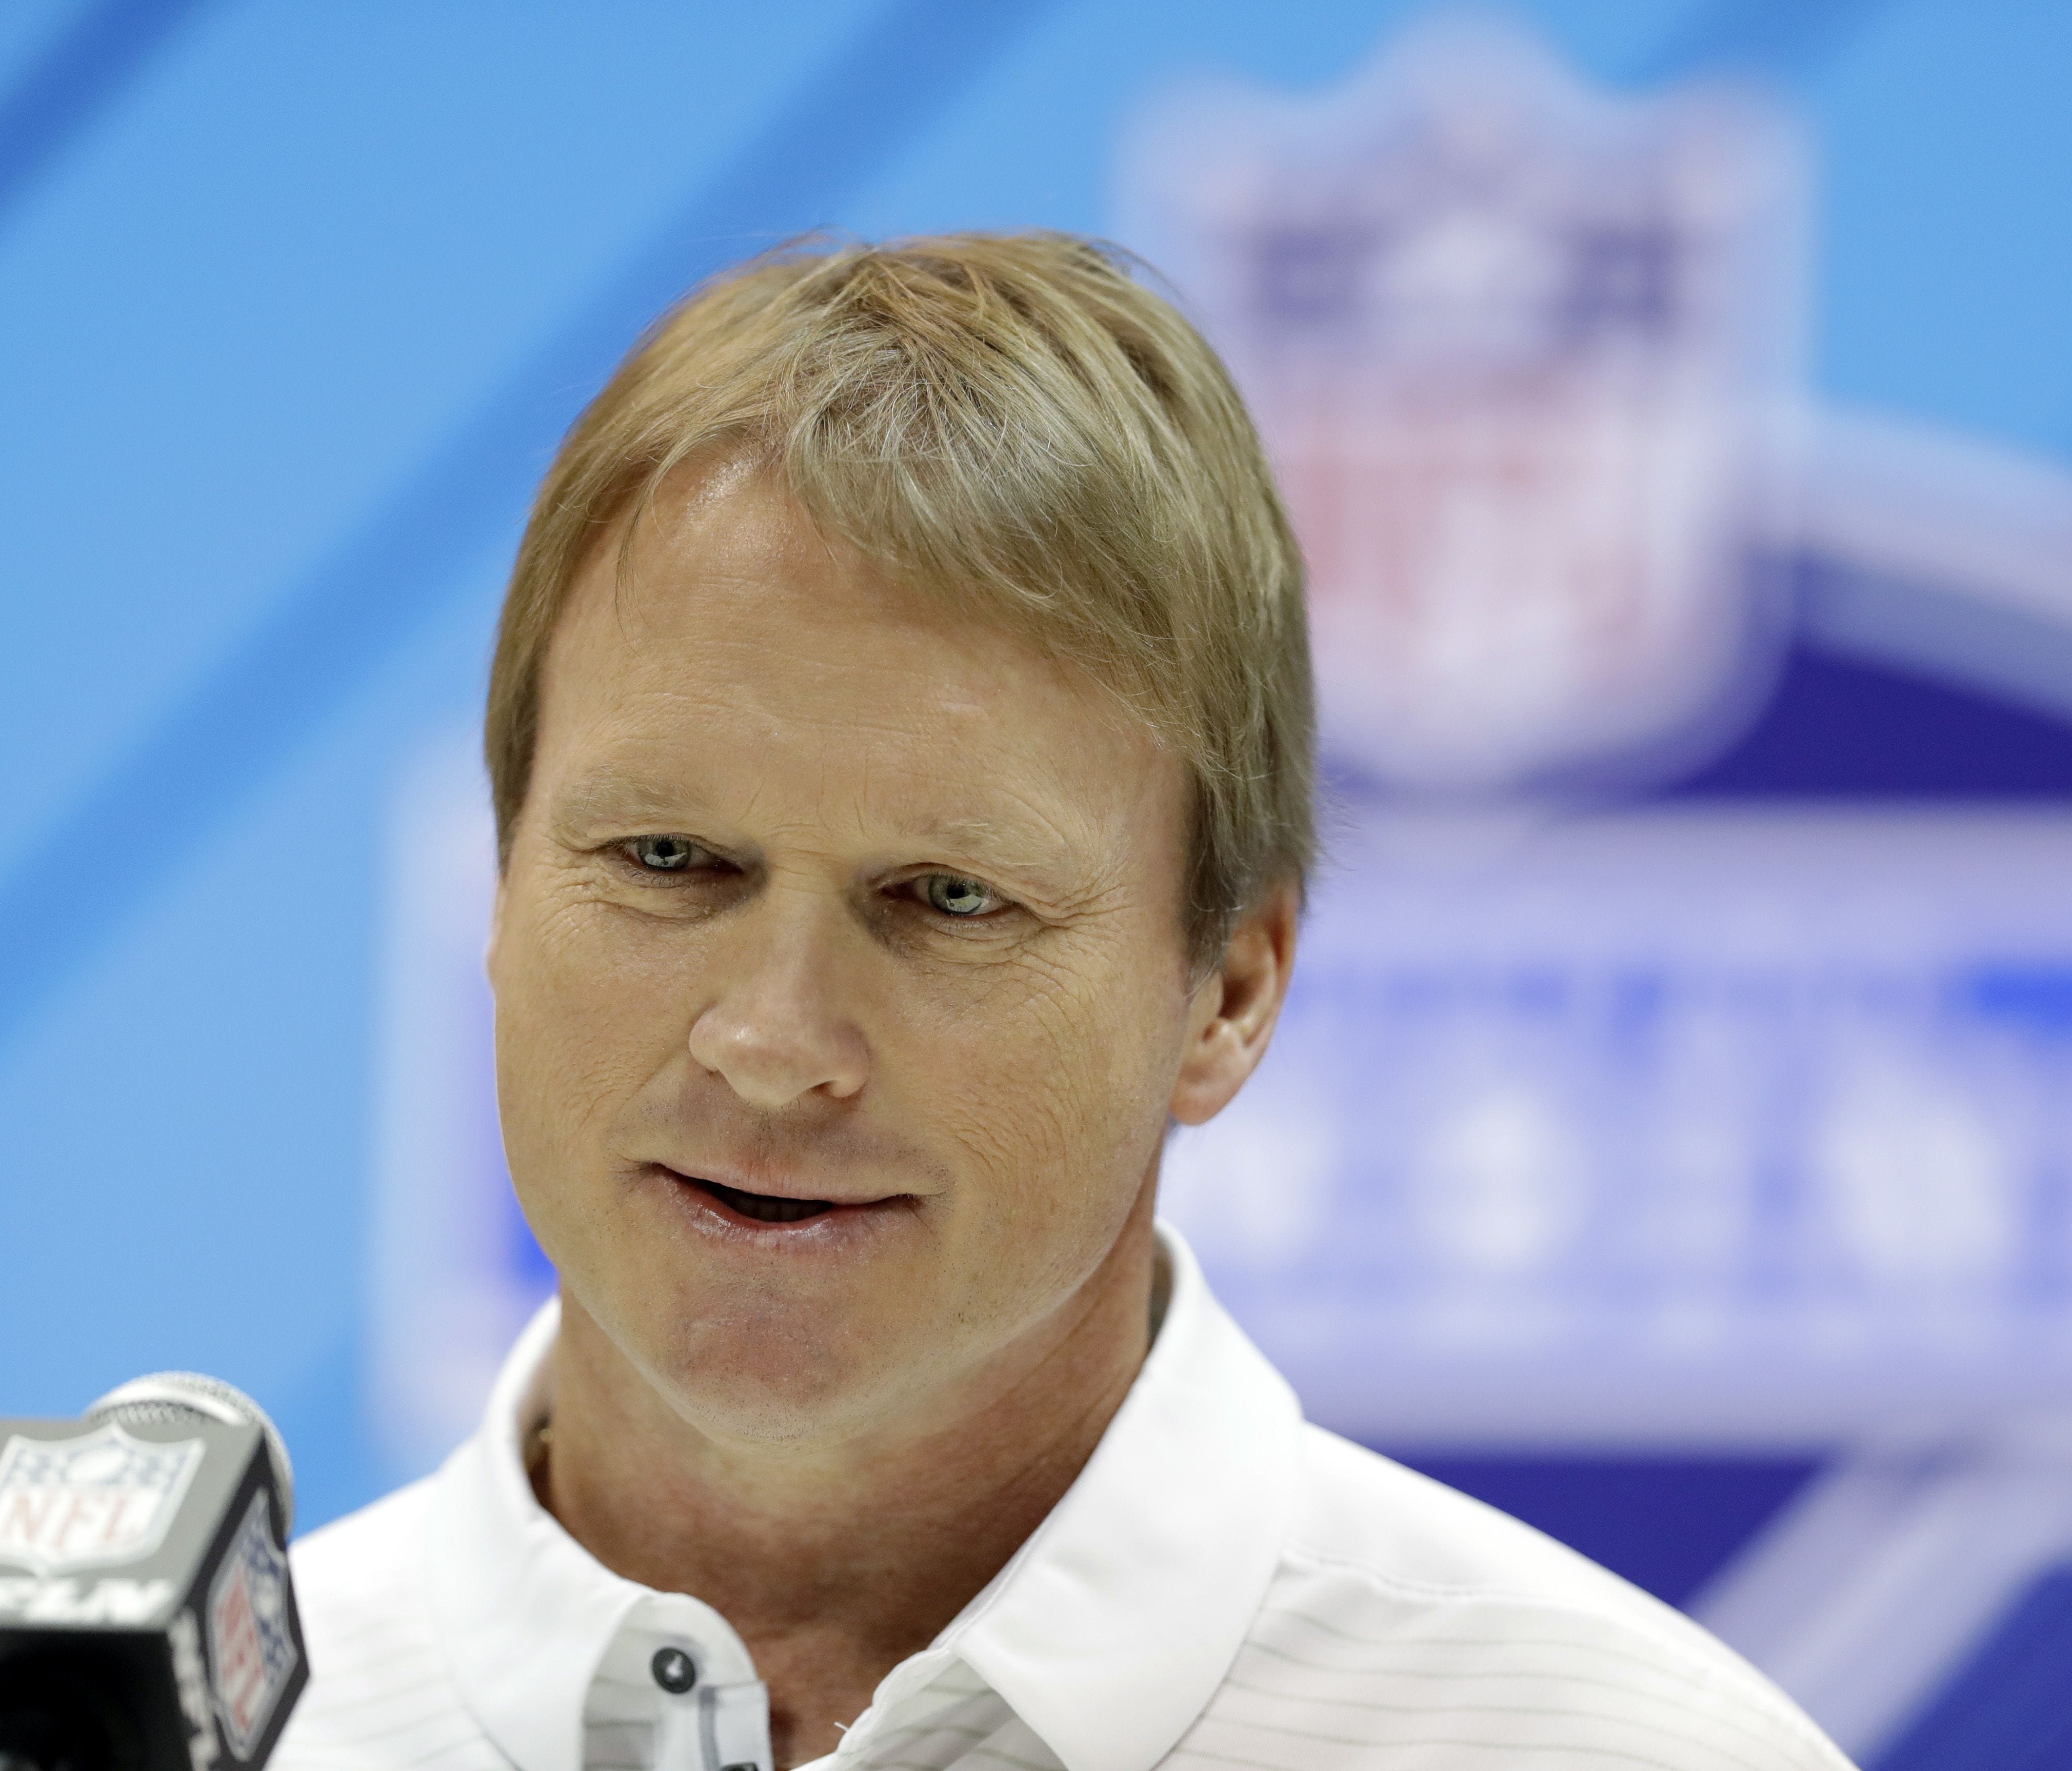 Oakland Raiders head coach Jon Gruden speaks during a press conference at the NFL Combine, Wednesday, Feb. 28, 2018, in Indianapolis.